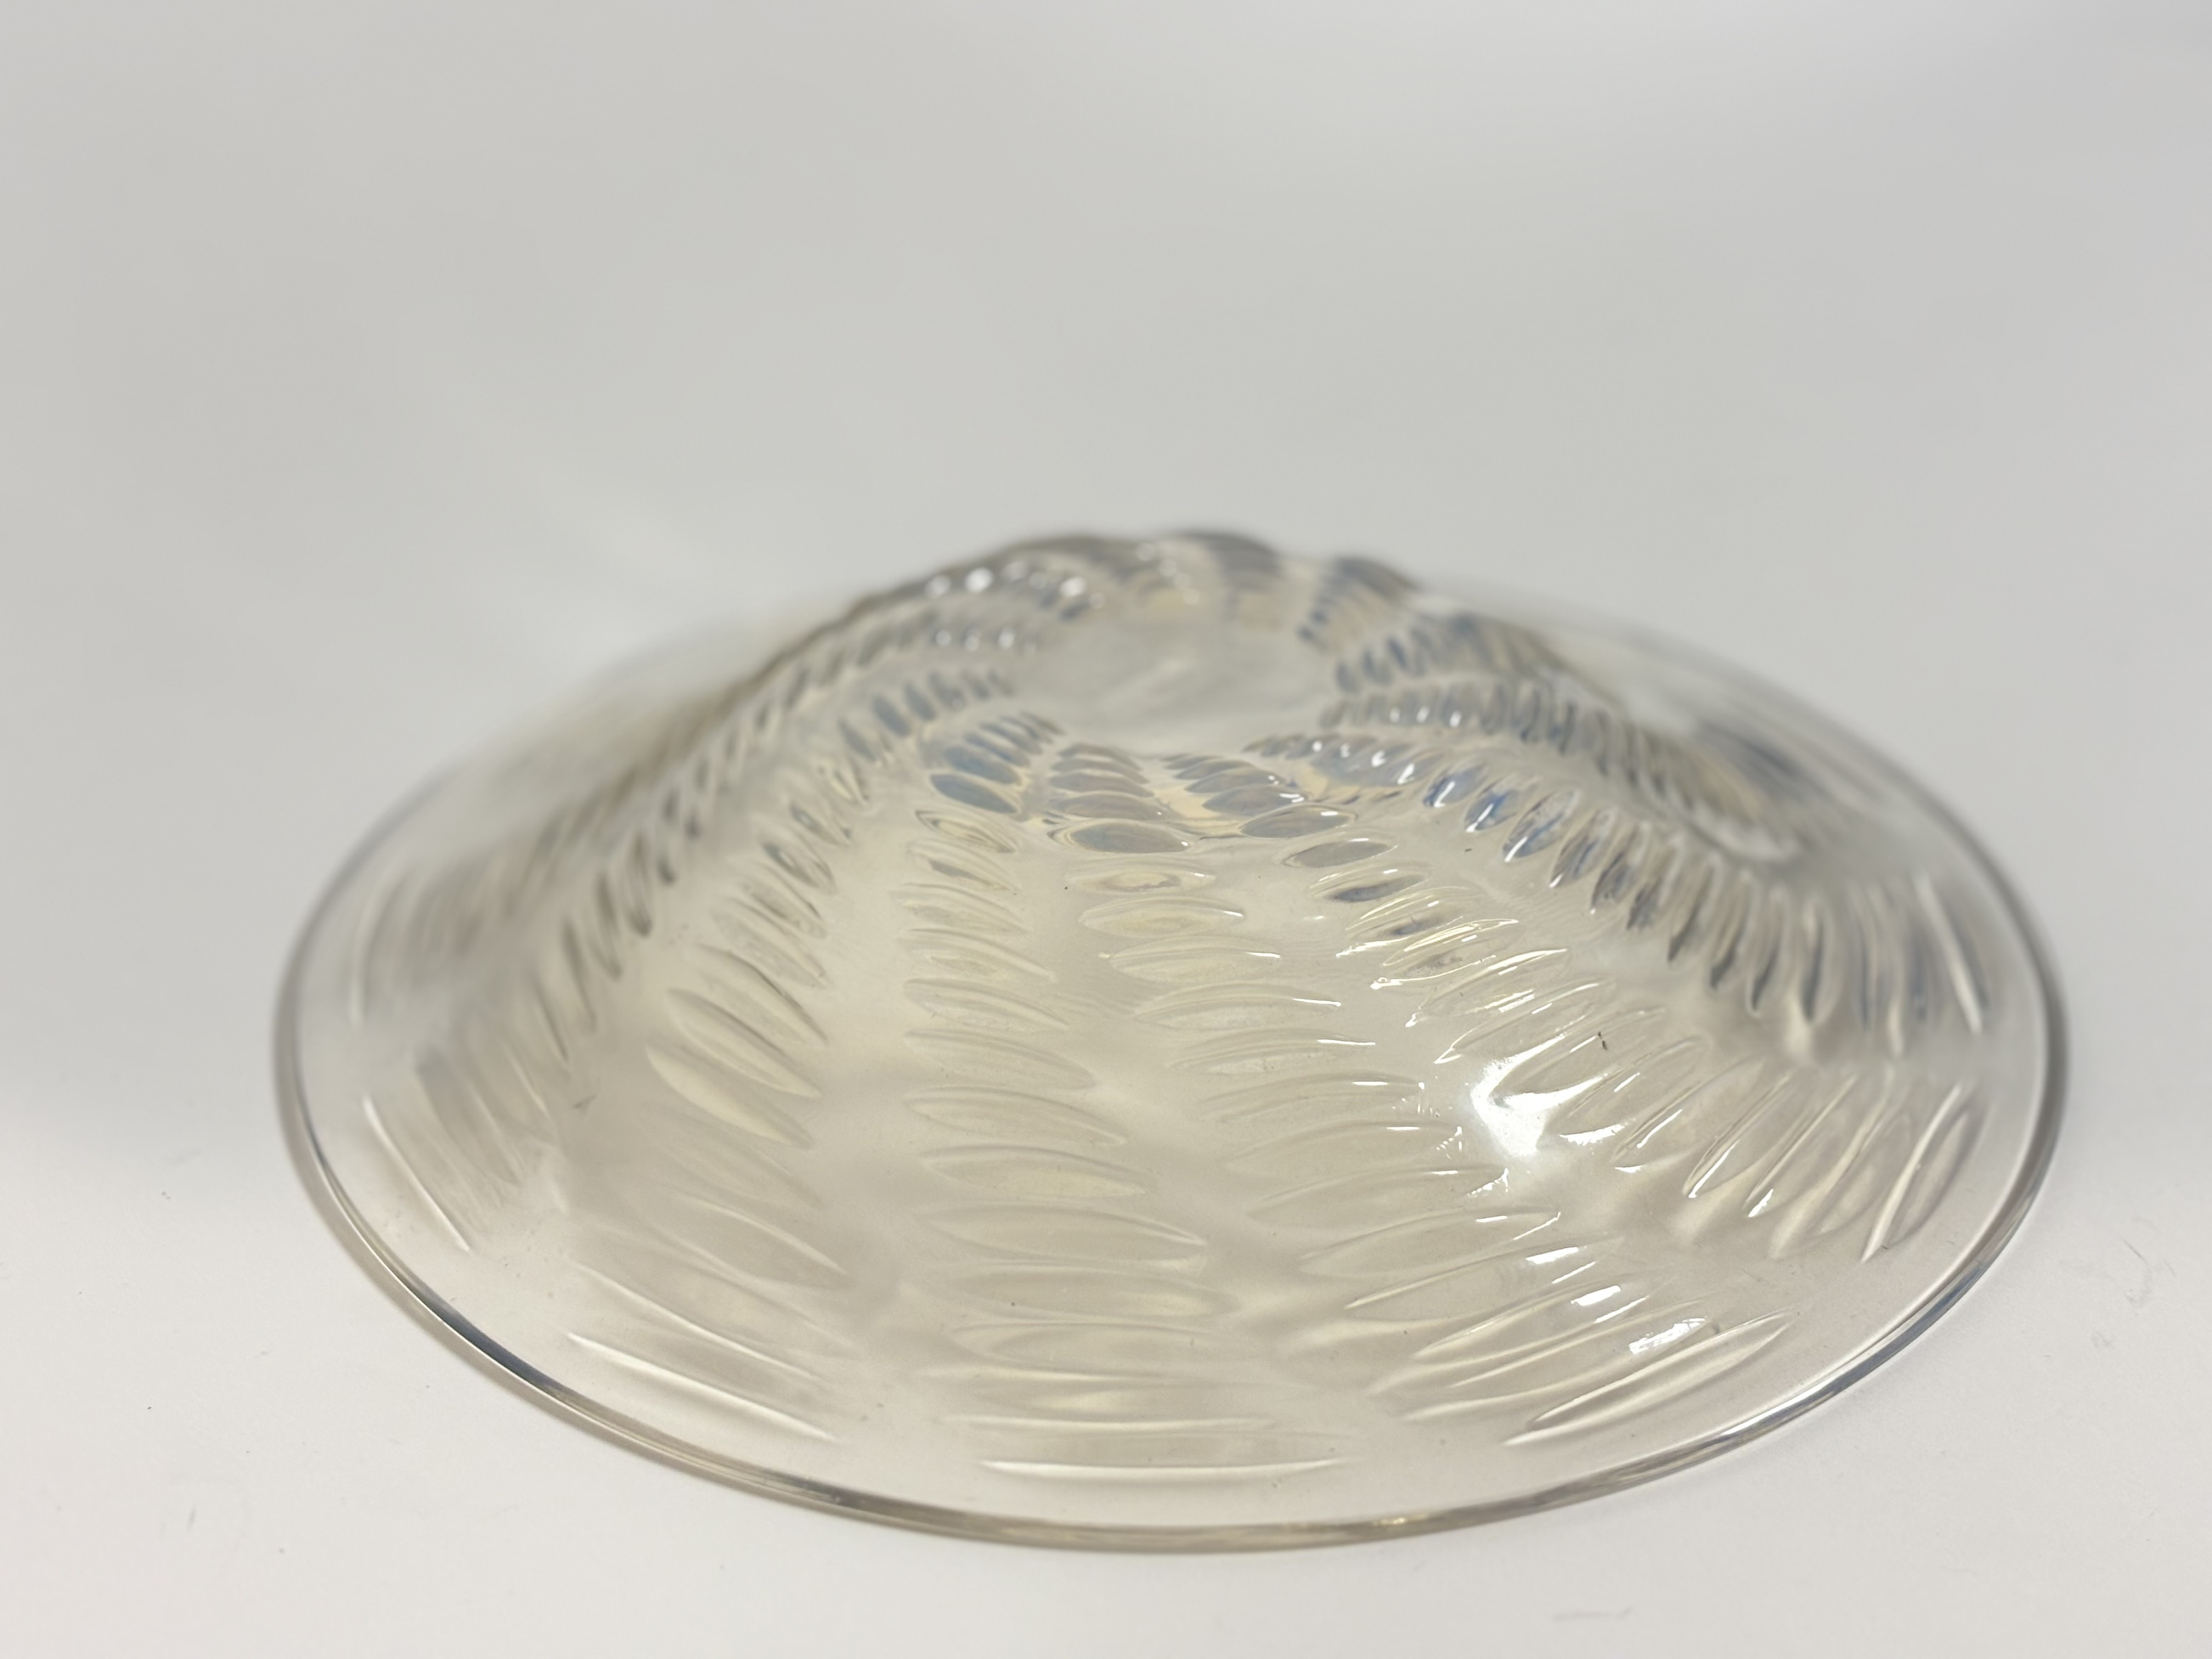 Lalique, Rene Lalique, Ondes pattern, a semi-opalescent glass coupe ouverte, etched mark (no - Image 3 of 5